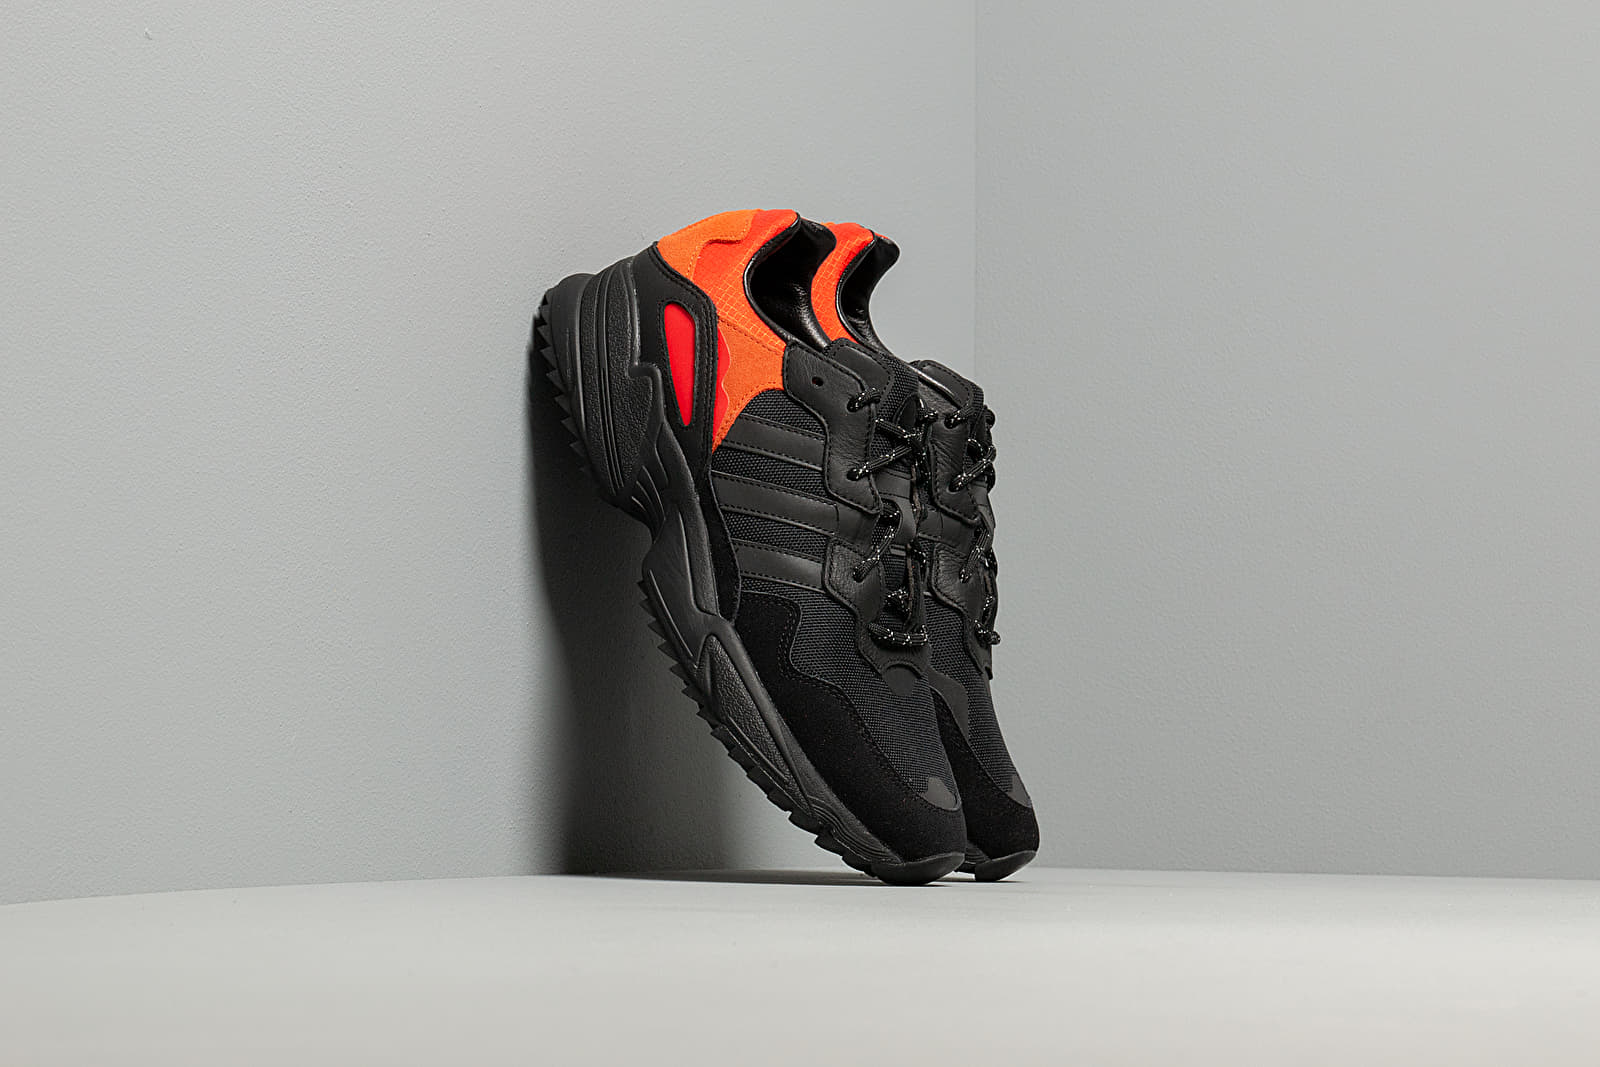 Chaussures et baskets homme adidas Yung-96 Trail Core Black/ Trace Green Metalic/ Flace Orange